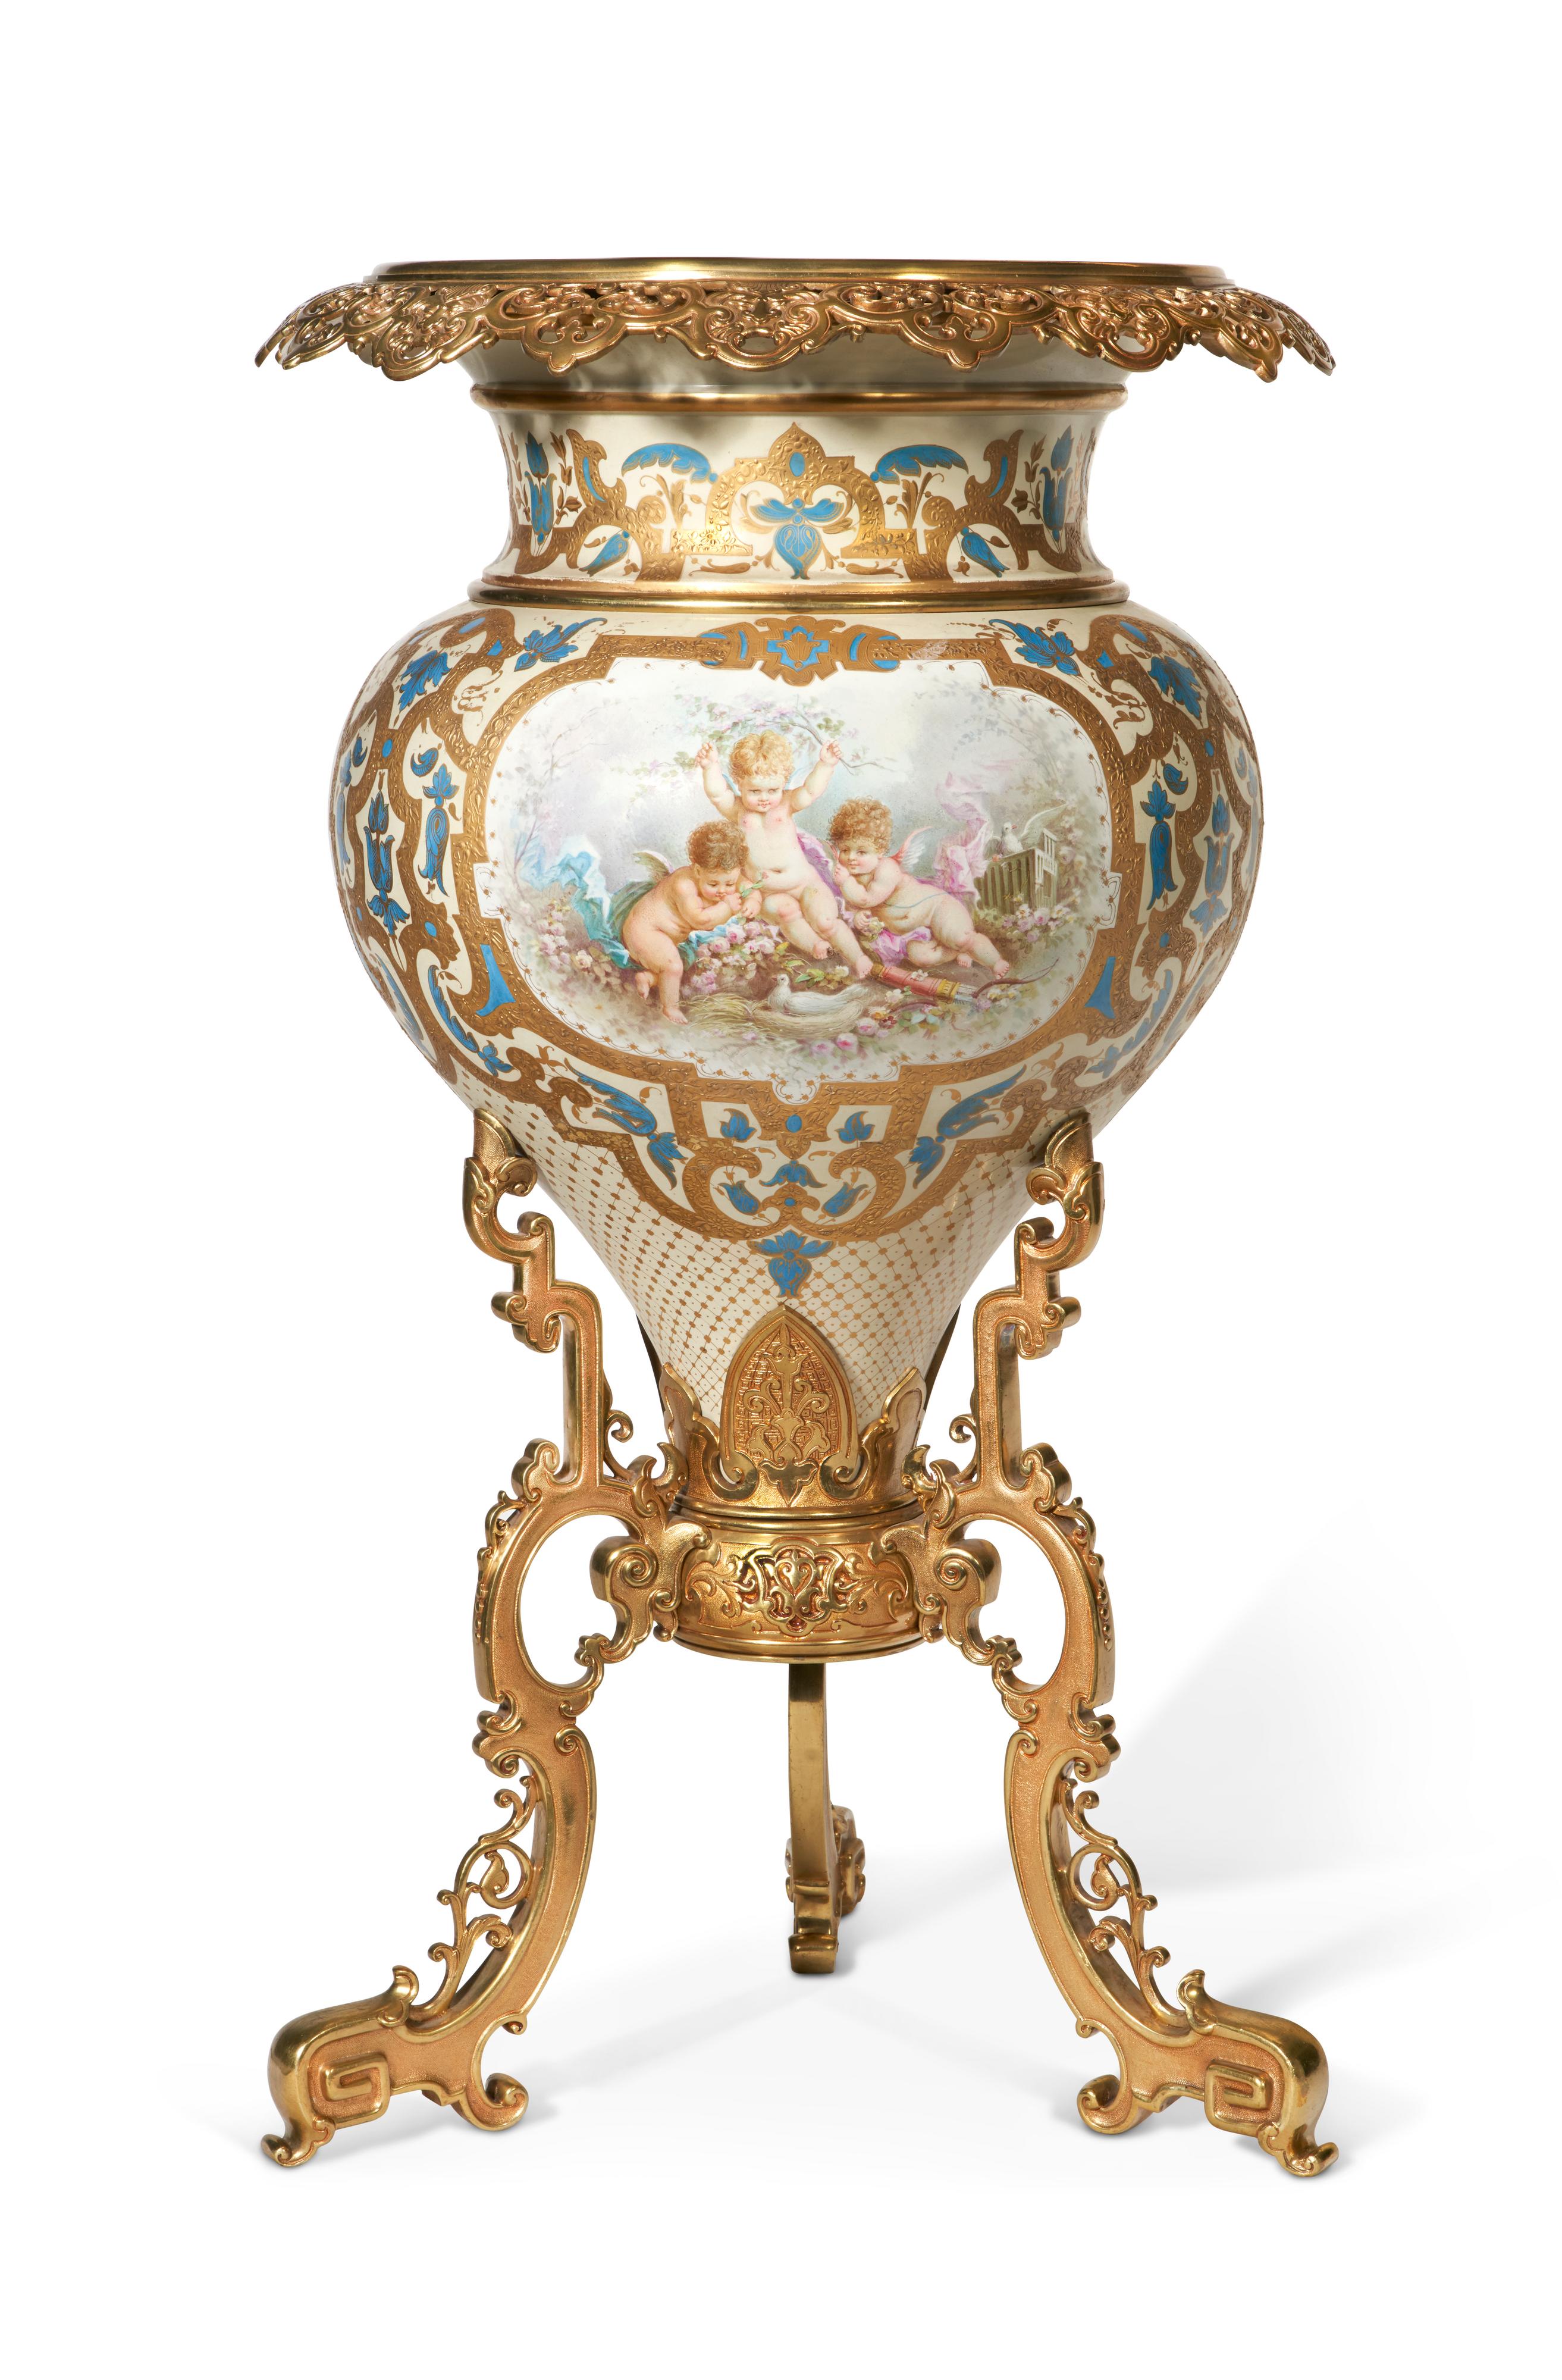 A Large & Important French 19th C. Louis XVI Style Sevres Porcelain Ormolu Mounted Jardiniere. This magnificent piece is of a baluster form with an externally mounted ormolu rim which is cast with spectacularly with an open fretwork design. The